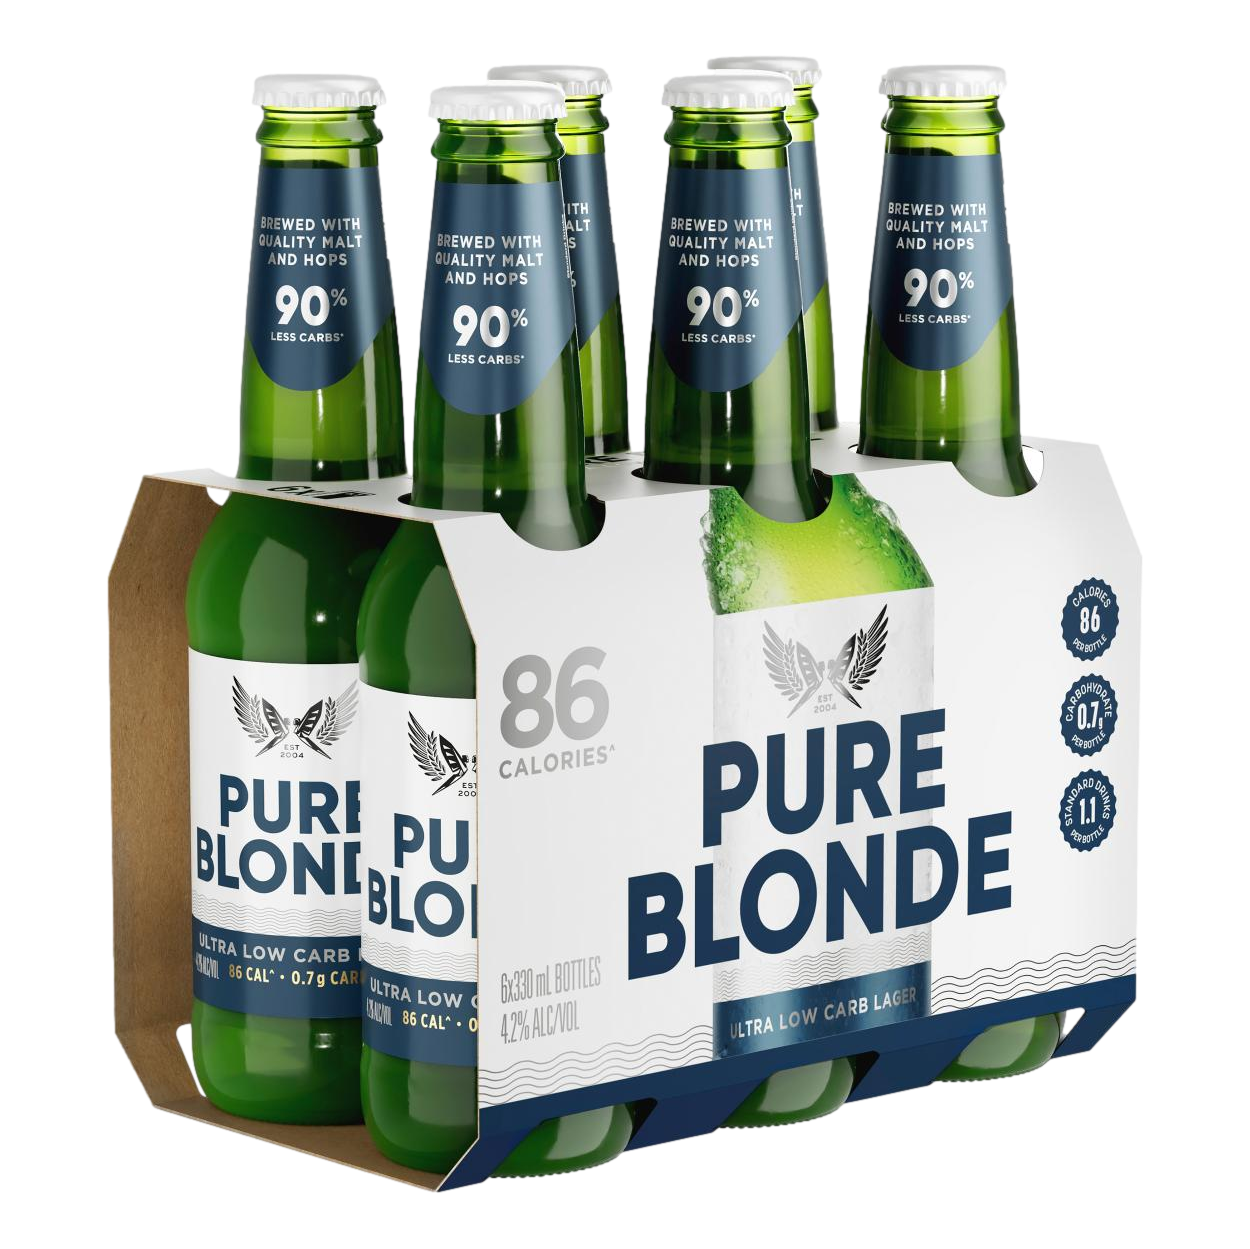 Pure Blonde Ultra Low Carb 90% Lager 330ml Bottle 6 Pack